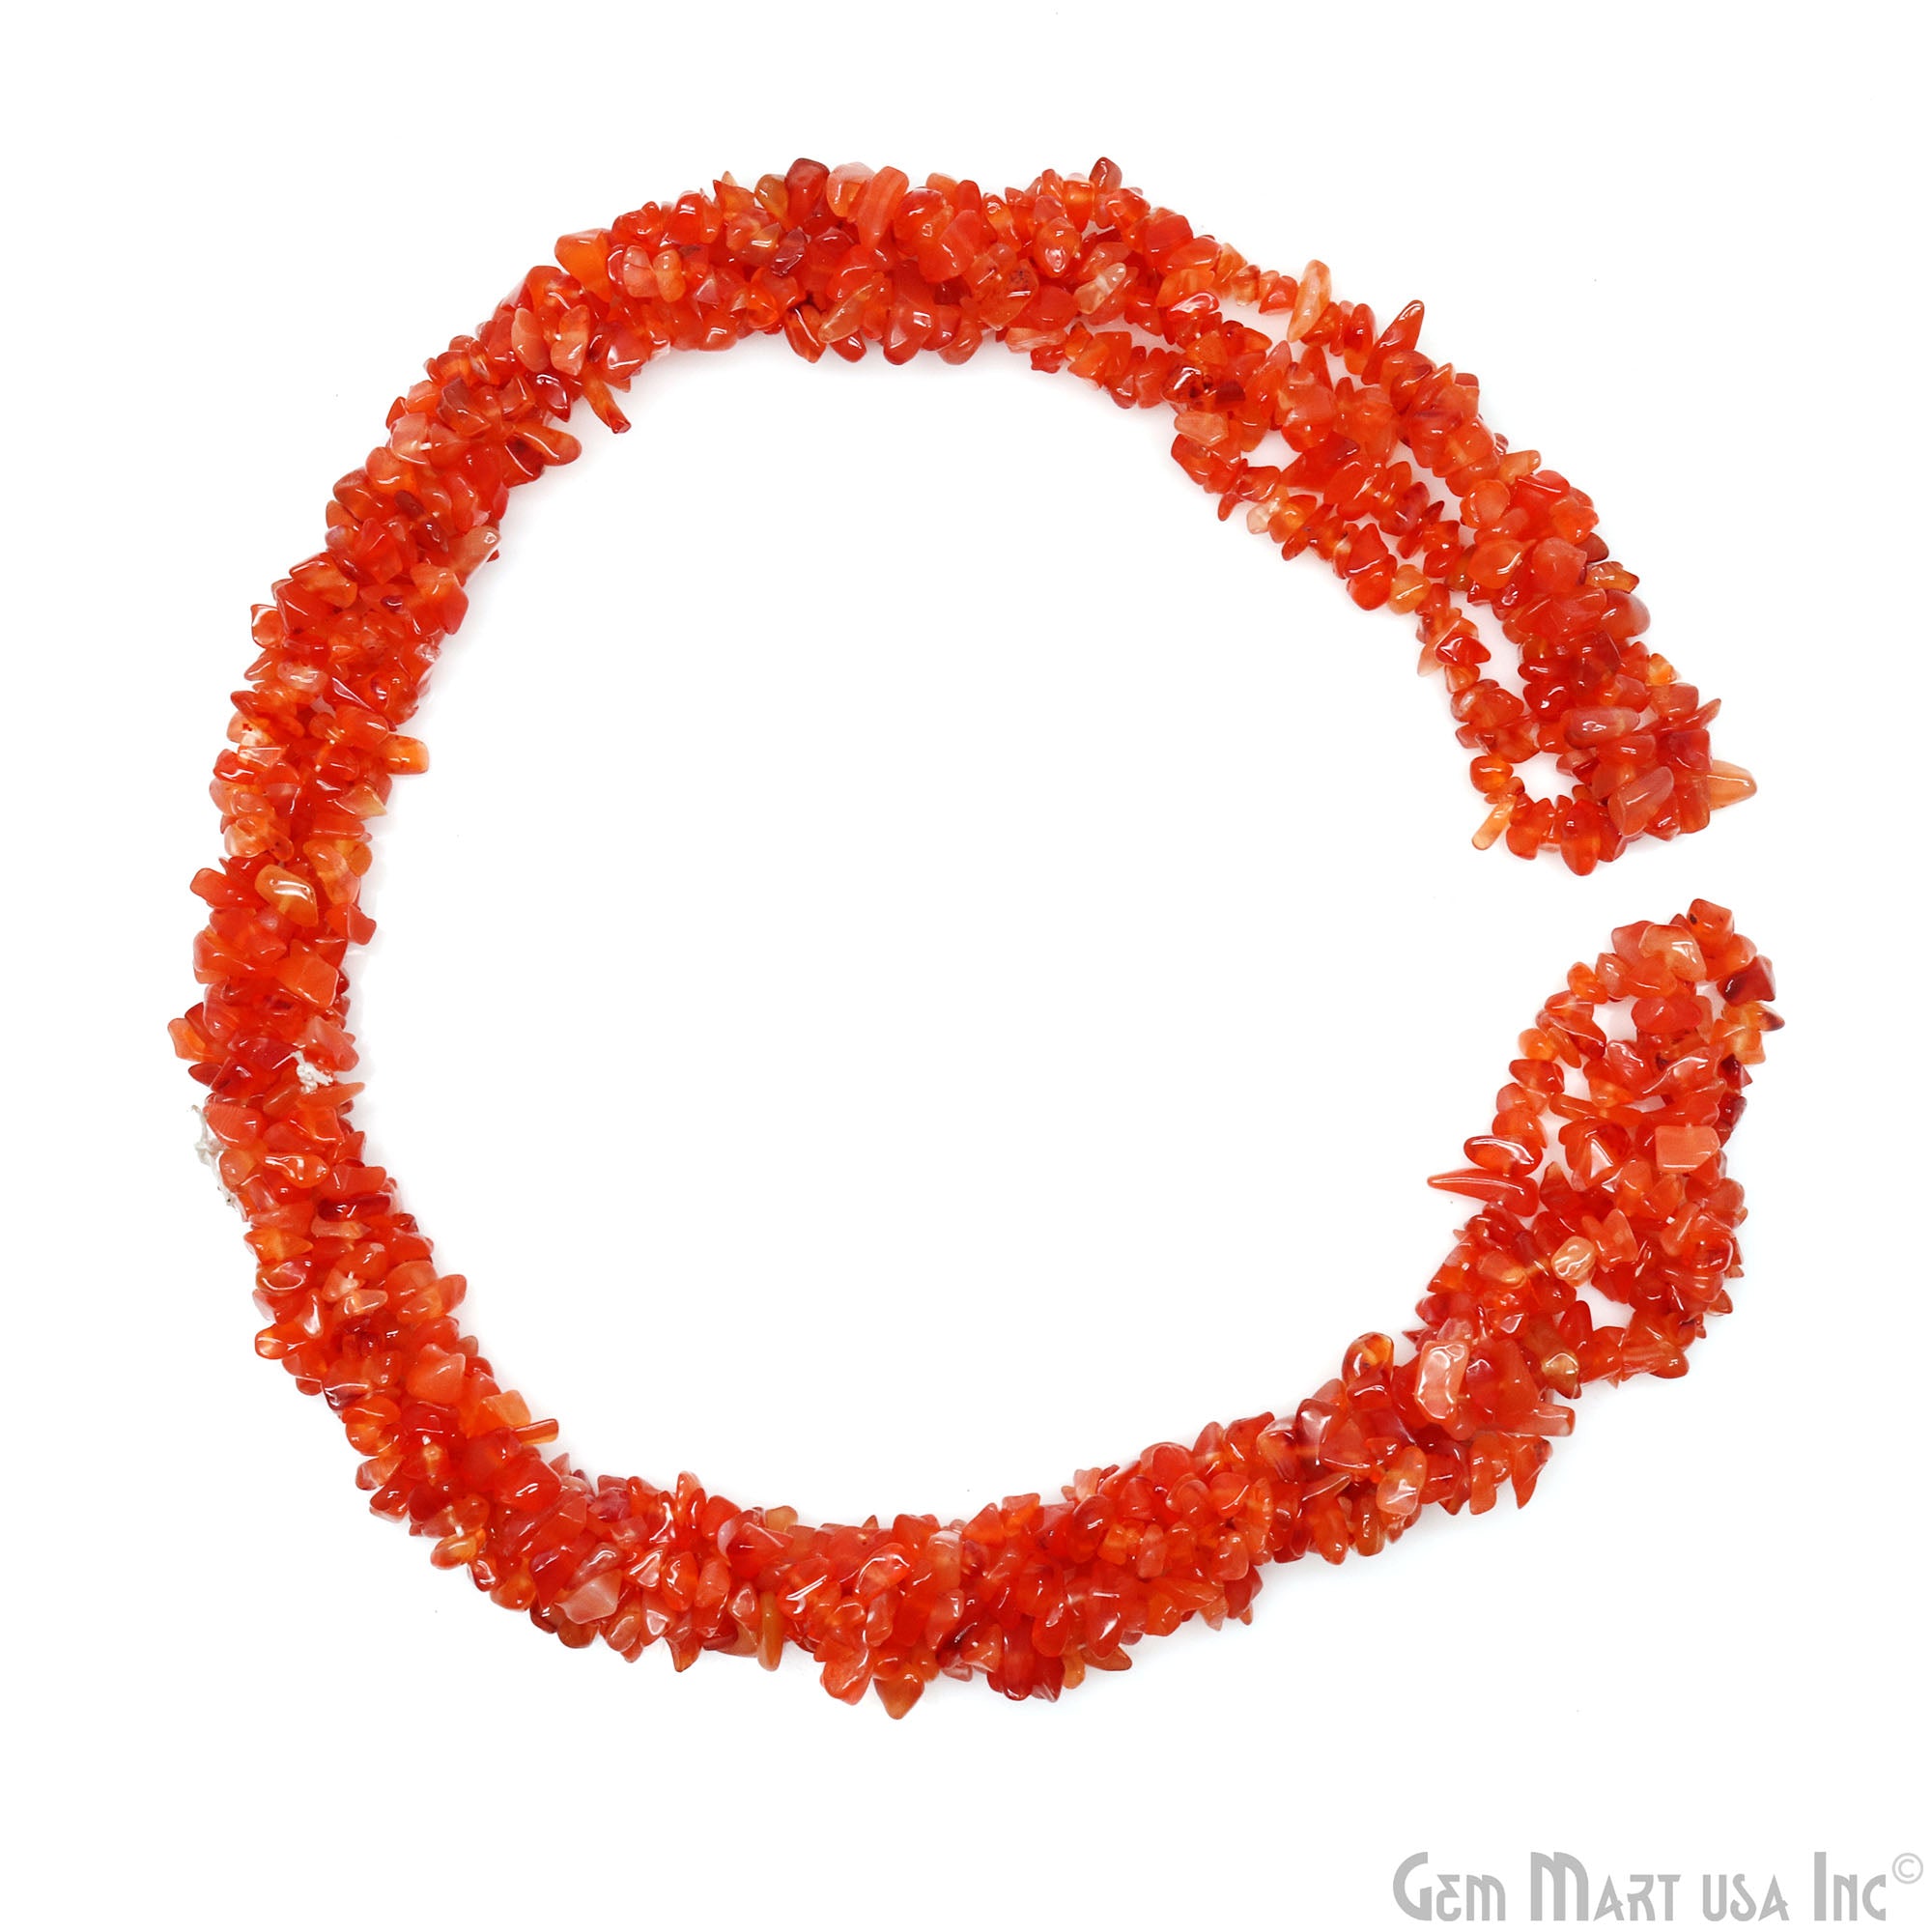 Natural Carnelian Nugget Chip 3-6mm Beads Drilled Chip Beads, 34" Strand (762210680879)